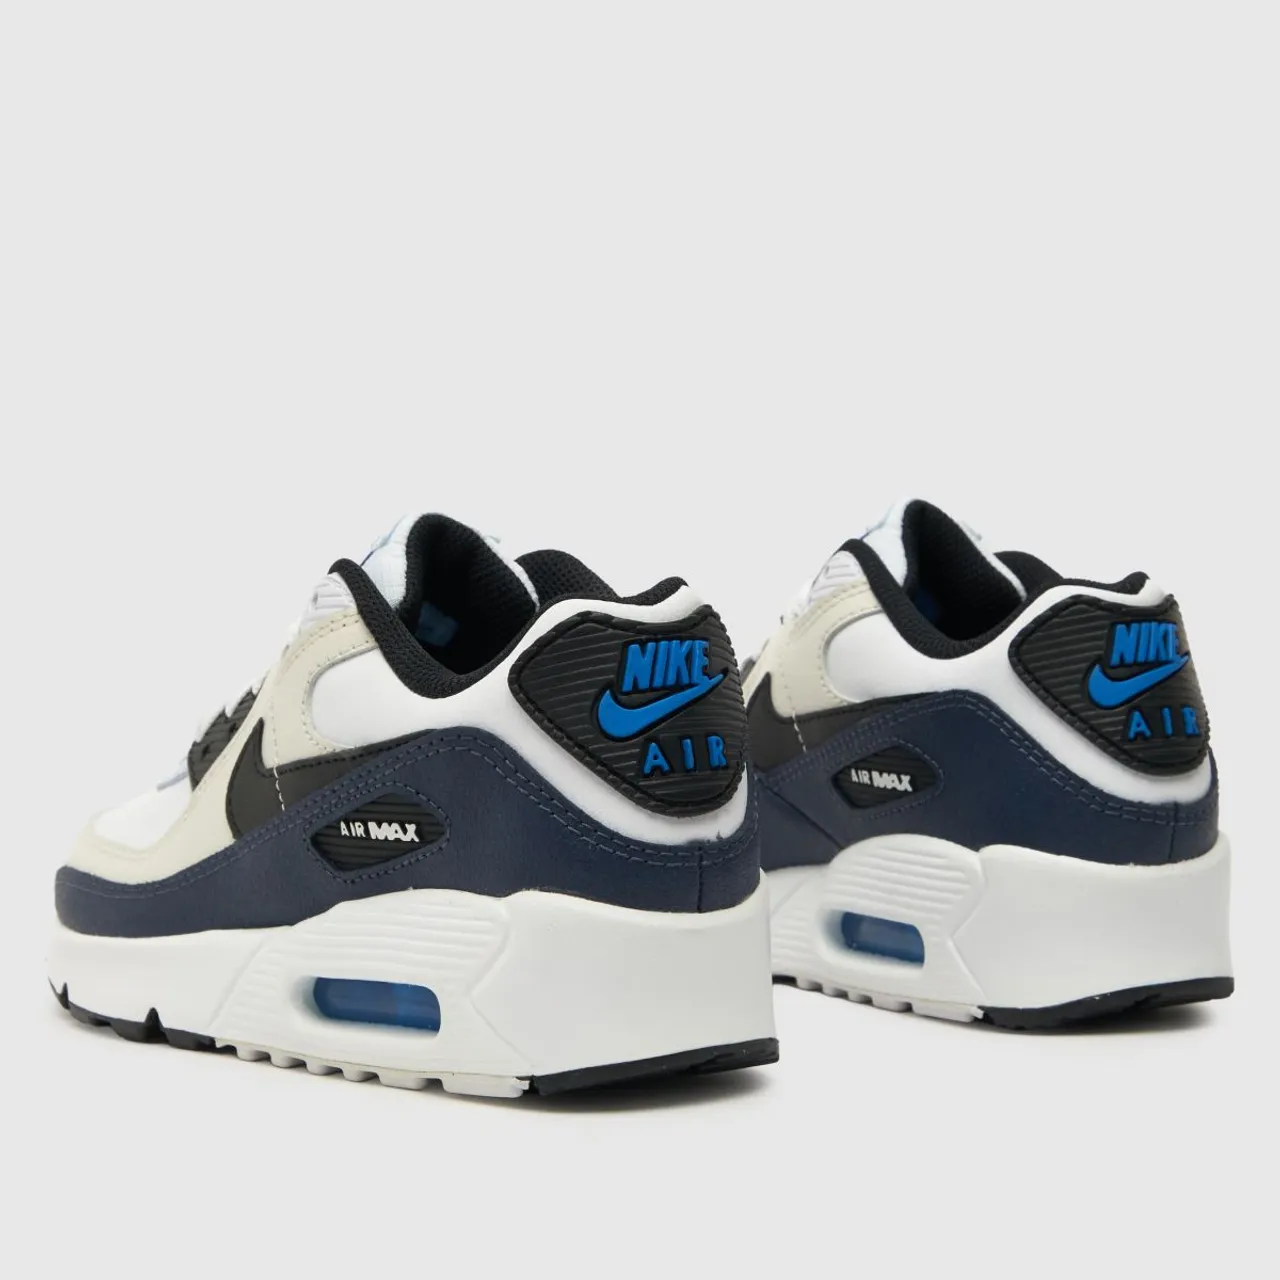 Nike Navy Multi Air Max 90 Ltr Boys Youth Trainers